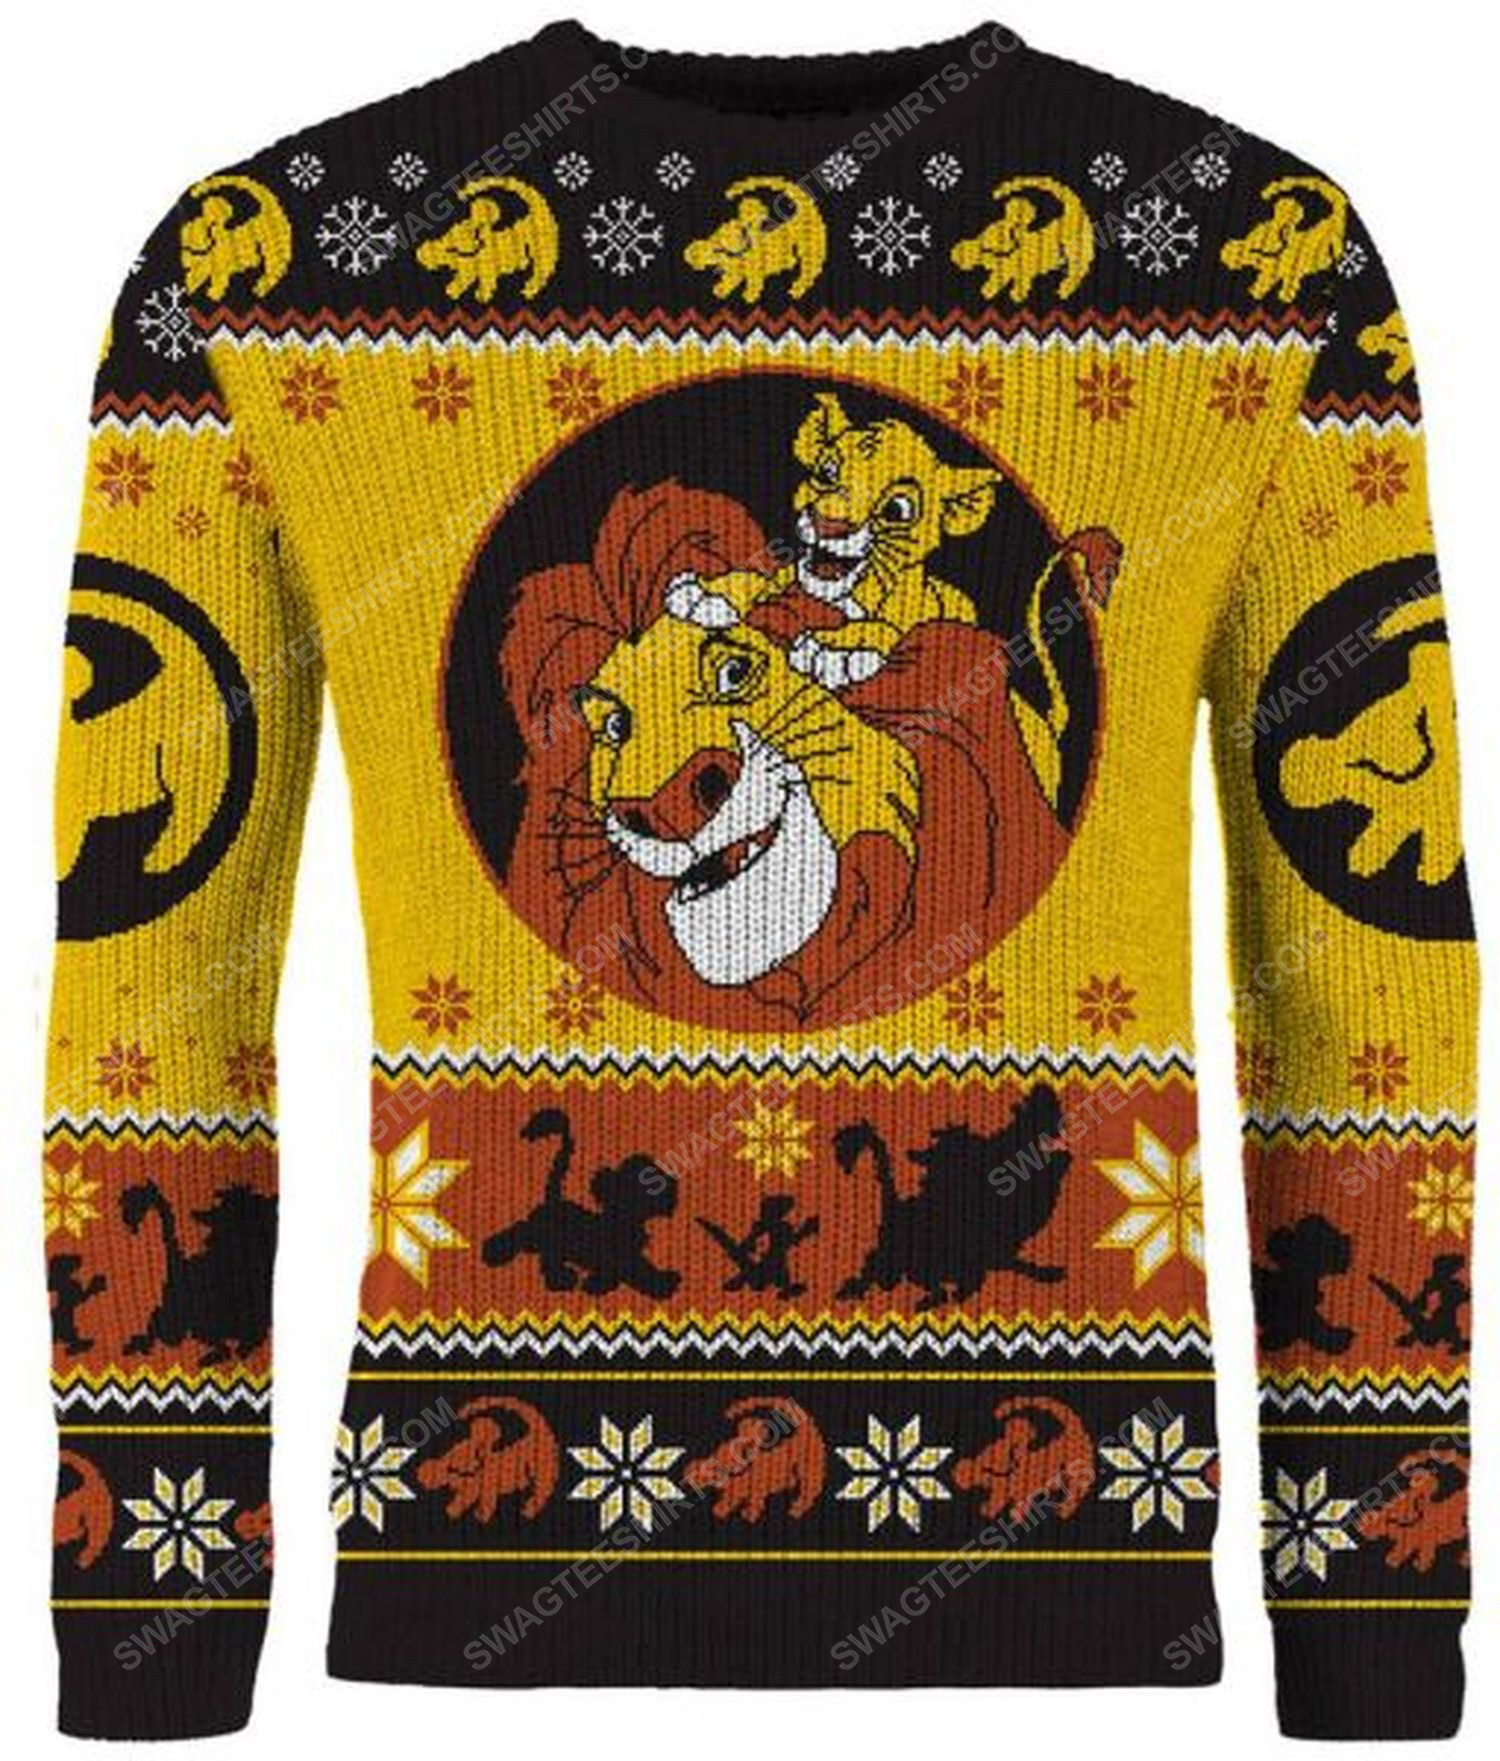 [special edition] Christmas holiday lion king full print ugly christmas sweater – maria